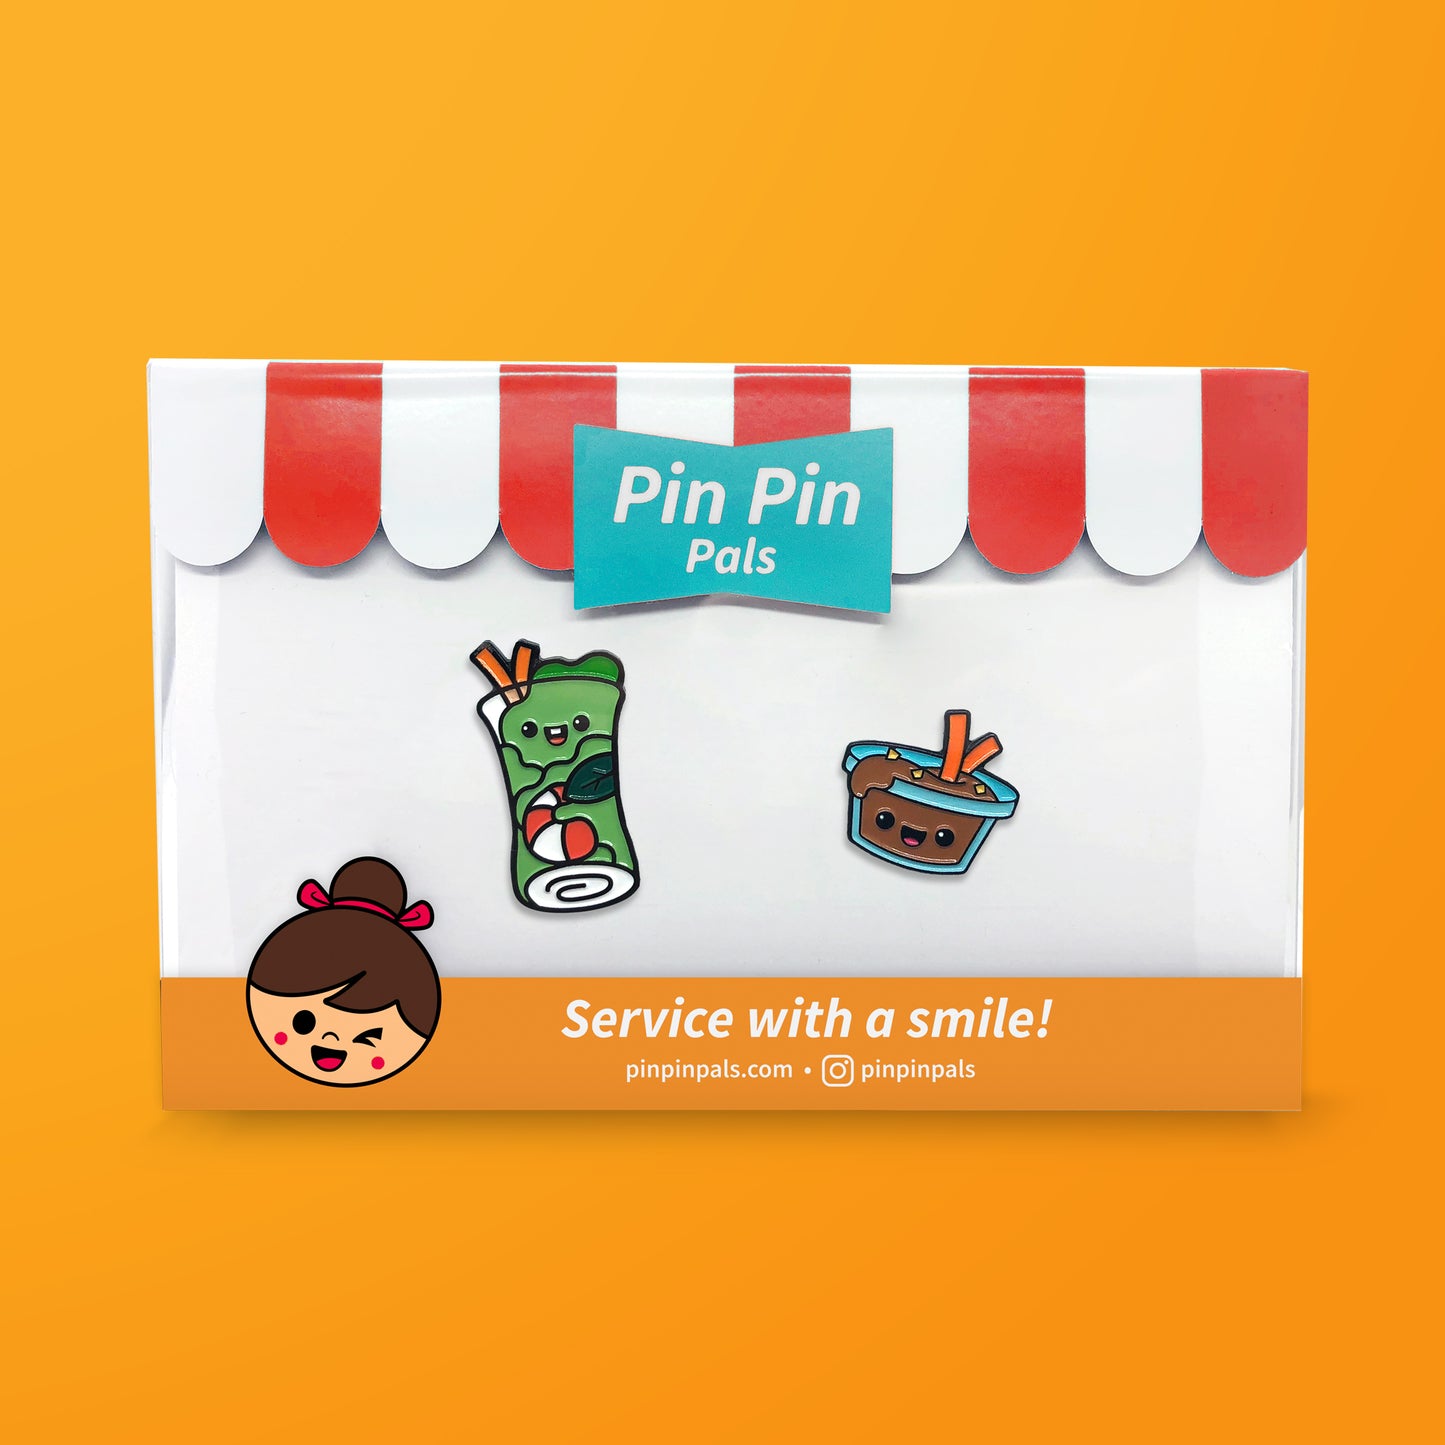 Pin Pin Pals Spring Roll and Peanut Sauce enamel pin set in packaging box on orange background